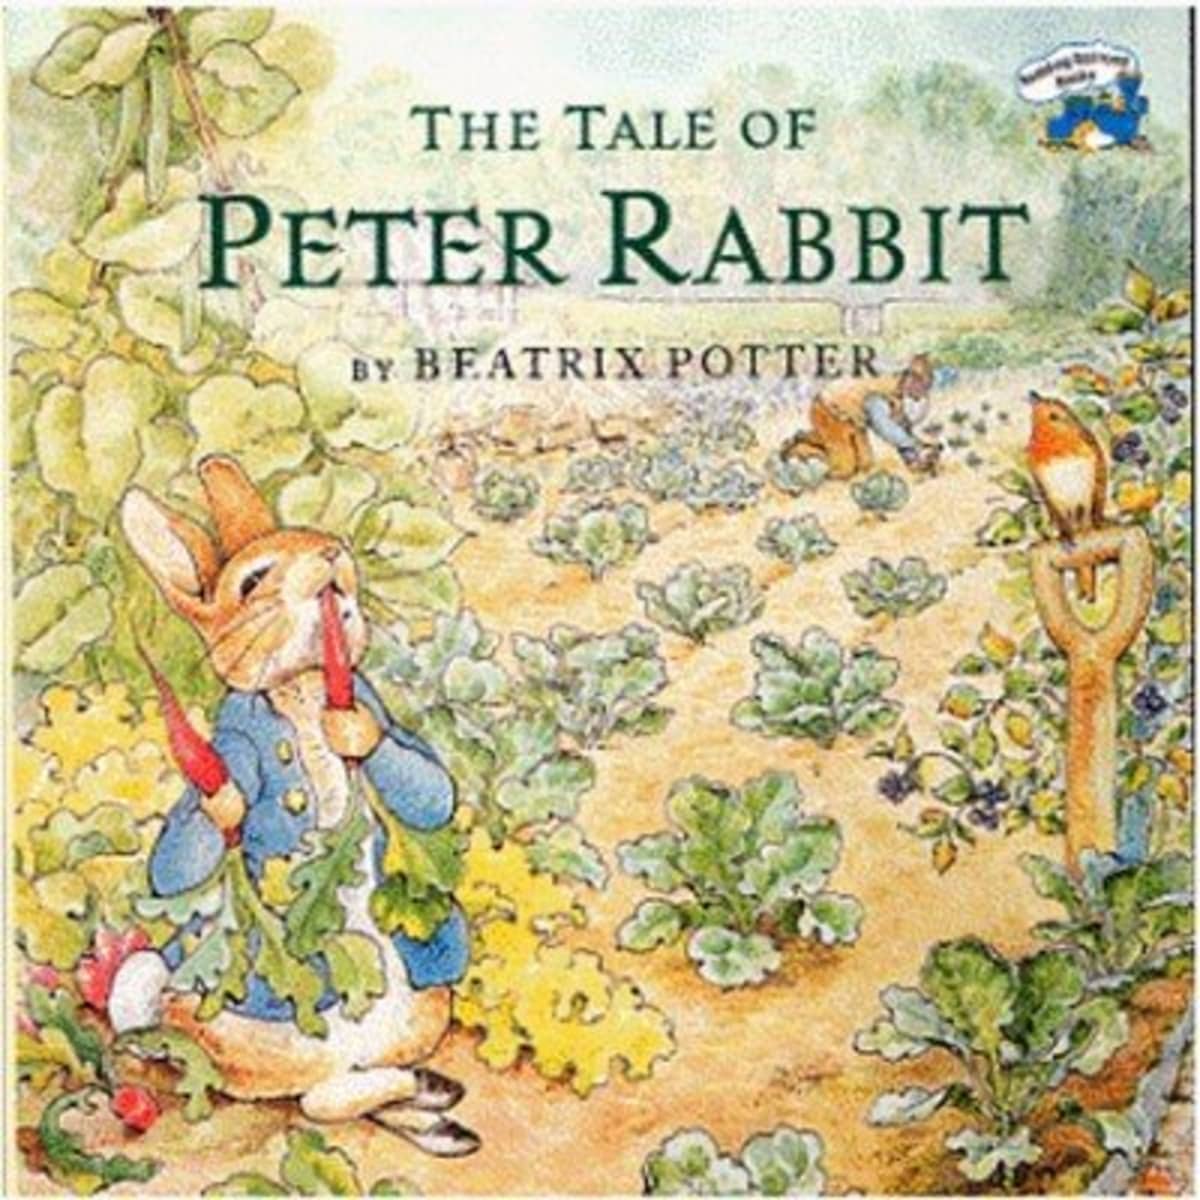 Beatrix Potter, the Flopsy Bunnies and the British Museum